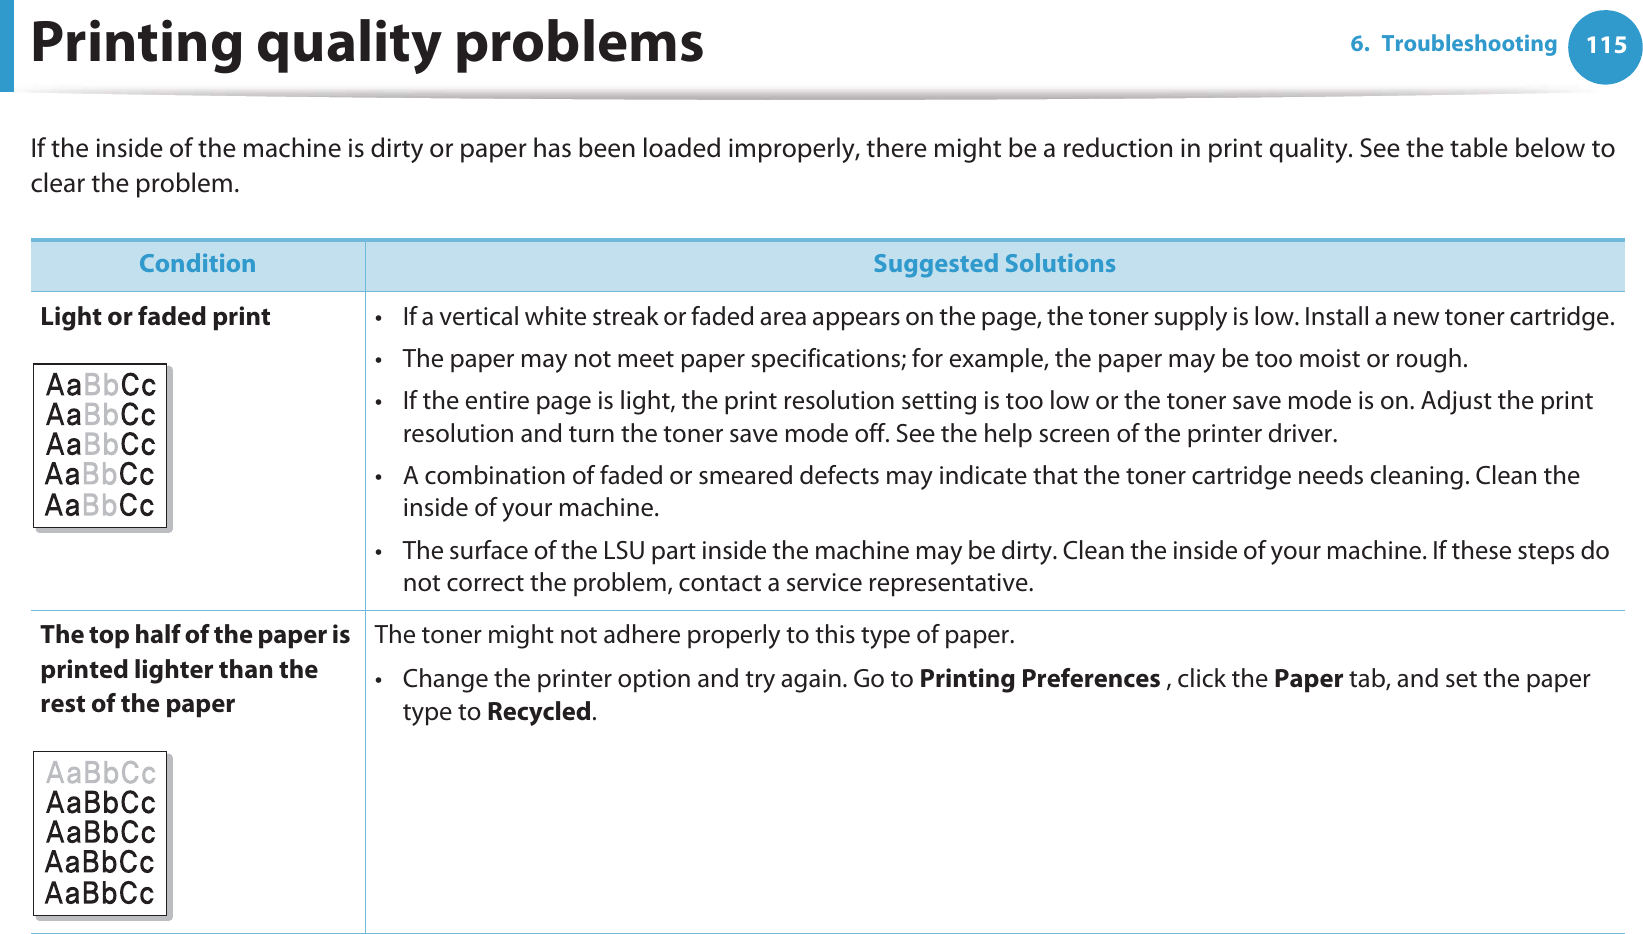 1156. TroubleshootingPrinting quality problemsIf the inside of the machine is dirty or paper has been loaded improperly, there might be a reduction in print quality. See the table below to clear the problem.  Condition Suggested SolutionsLight or faded print • If a vertical white streak or faded area appears on the page, the toner supply is low. Install a new toner cartridge.• The paper may not meet paper specifications; for example, the paper may be too moist or rough.• If the entire page is light, the print resolution setting is too low or the toner save mode is on. Adjust the print resolution and turn the toner save mode off. See the help screen of the printer driver.• A combination of faded or smeared defects may indicate that the toner cartridge needs cleaning. Clean the inside of your machine.• The surface of the LSU part inside the machine may be dirty. Clean the inside of your machine. If these steps do not correct the problem, contact a service representative.The top half of the paper is printed lighter than the rest of the paperThe toner might not adhere properly to this type of paper.• Change the printer option and try again. Go to Printing Preferences , click the Paper tab, and set the paper type to Recycled.